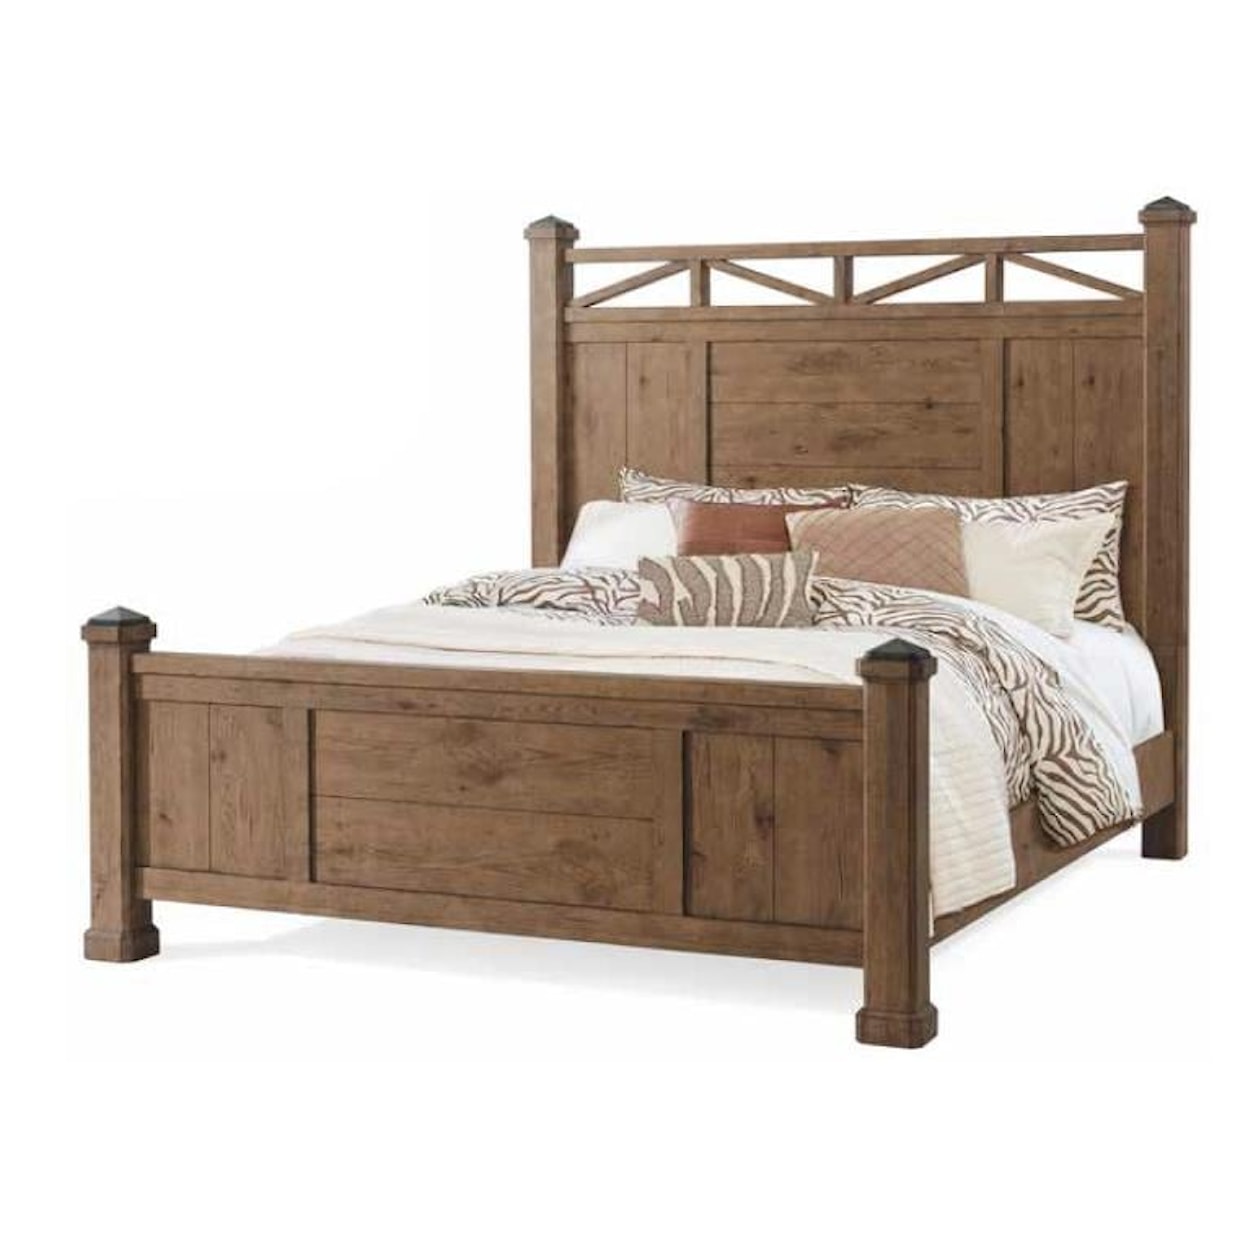 Trisha Yearwood Home Collection by Legacy Classic Coming Home King Poster Bed